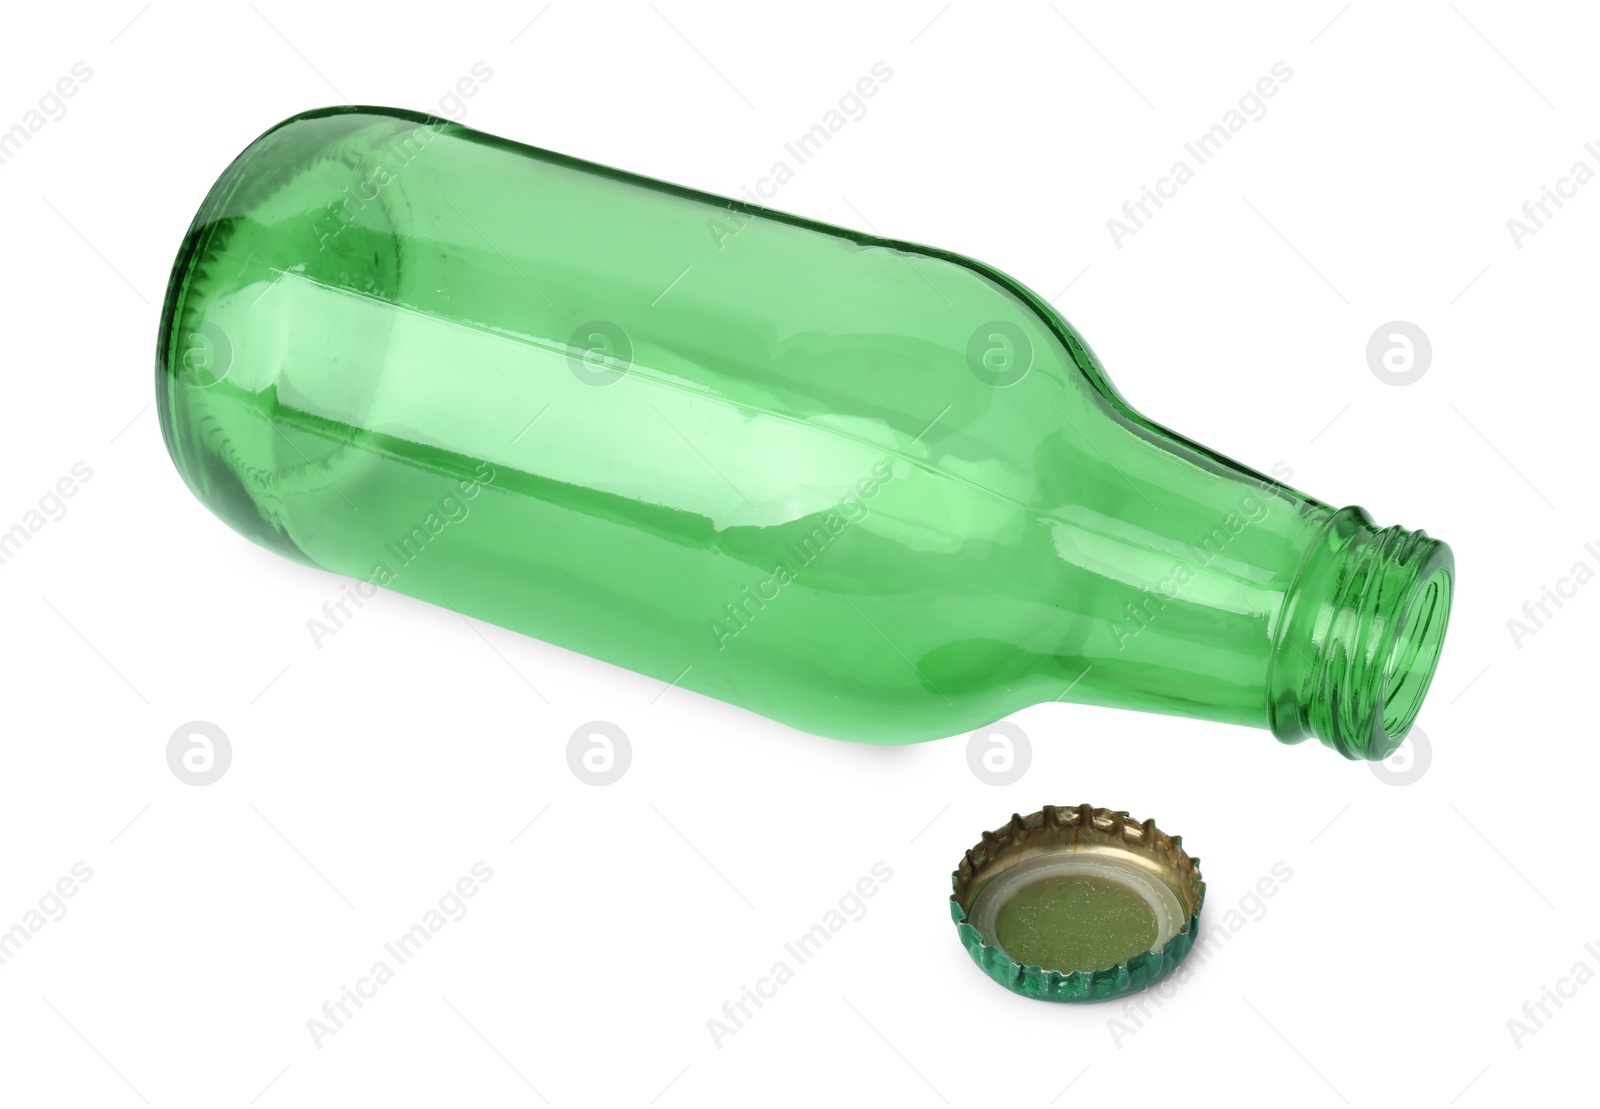 Photo of One empty green beer bottle and cap isolated on white